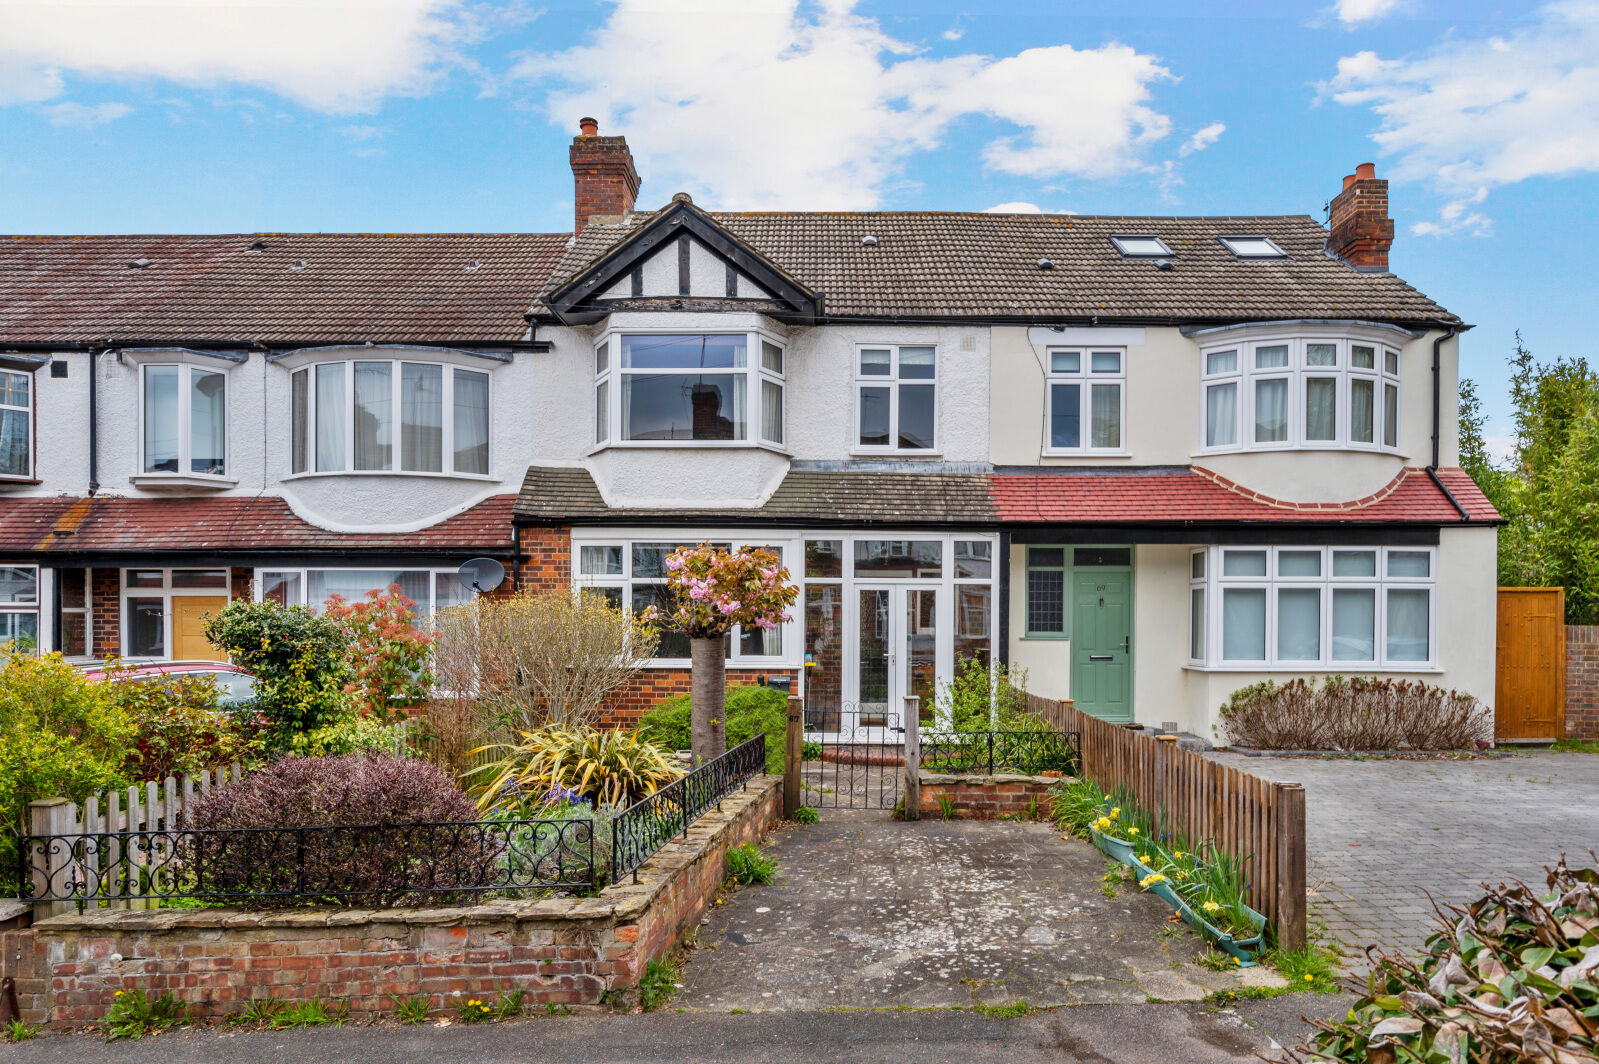 3 bedroom mid terraced house for sale Meadow Close, London, SW20, main image